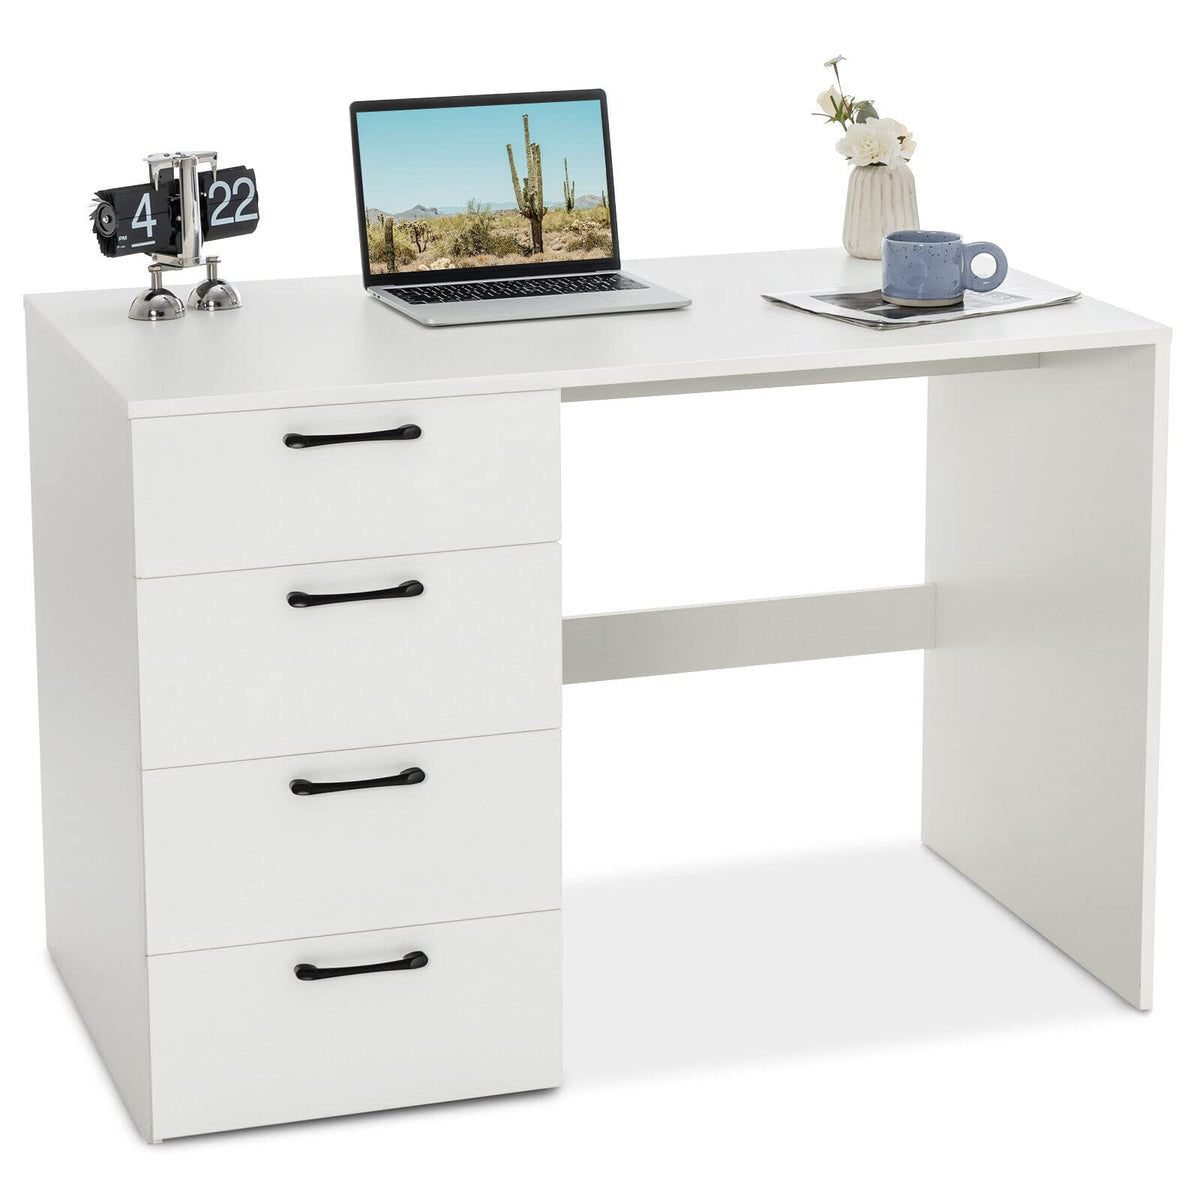 Giantex Computer Desk with 4 Drawer, Home Office Writing Desk with File Storage Cabinet